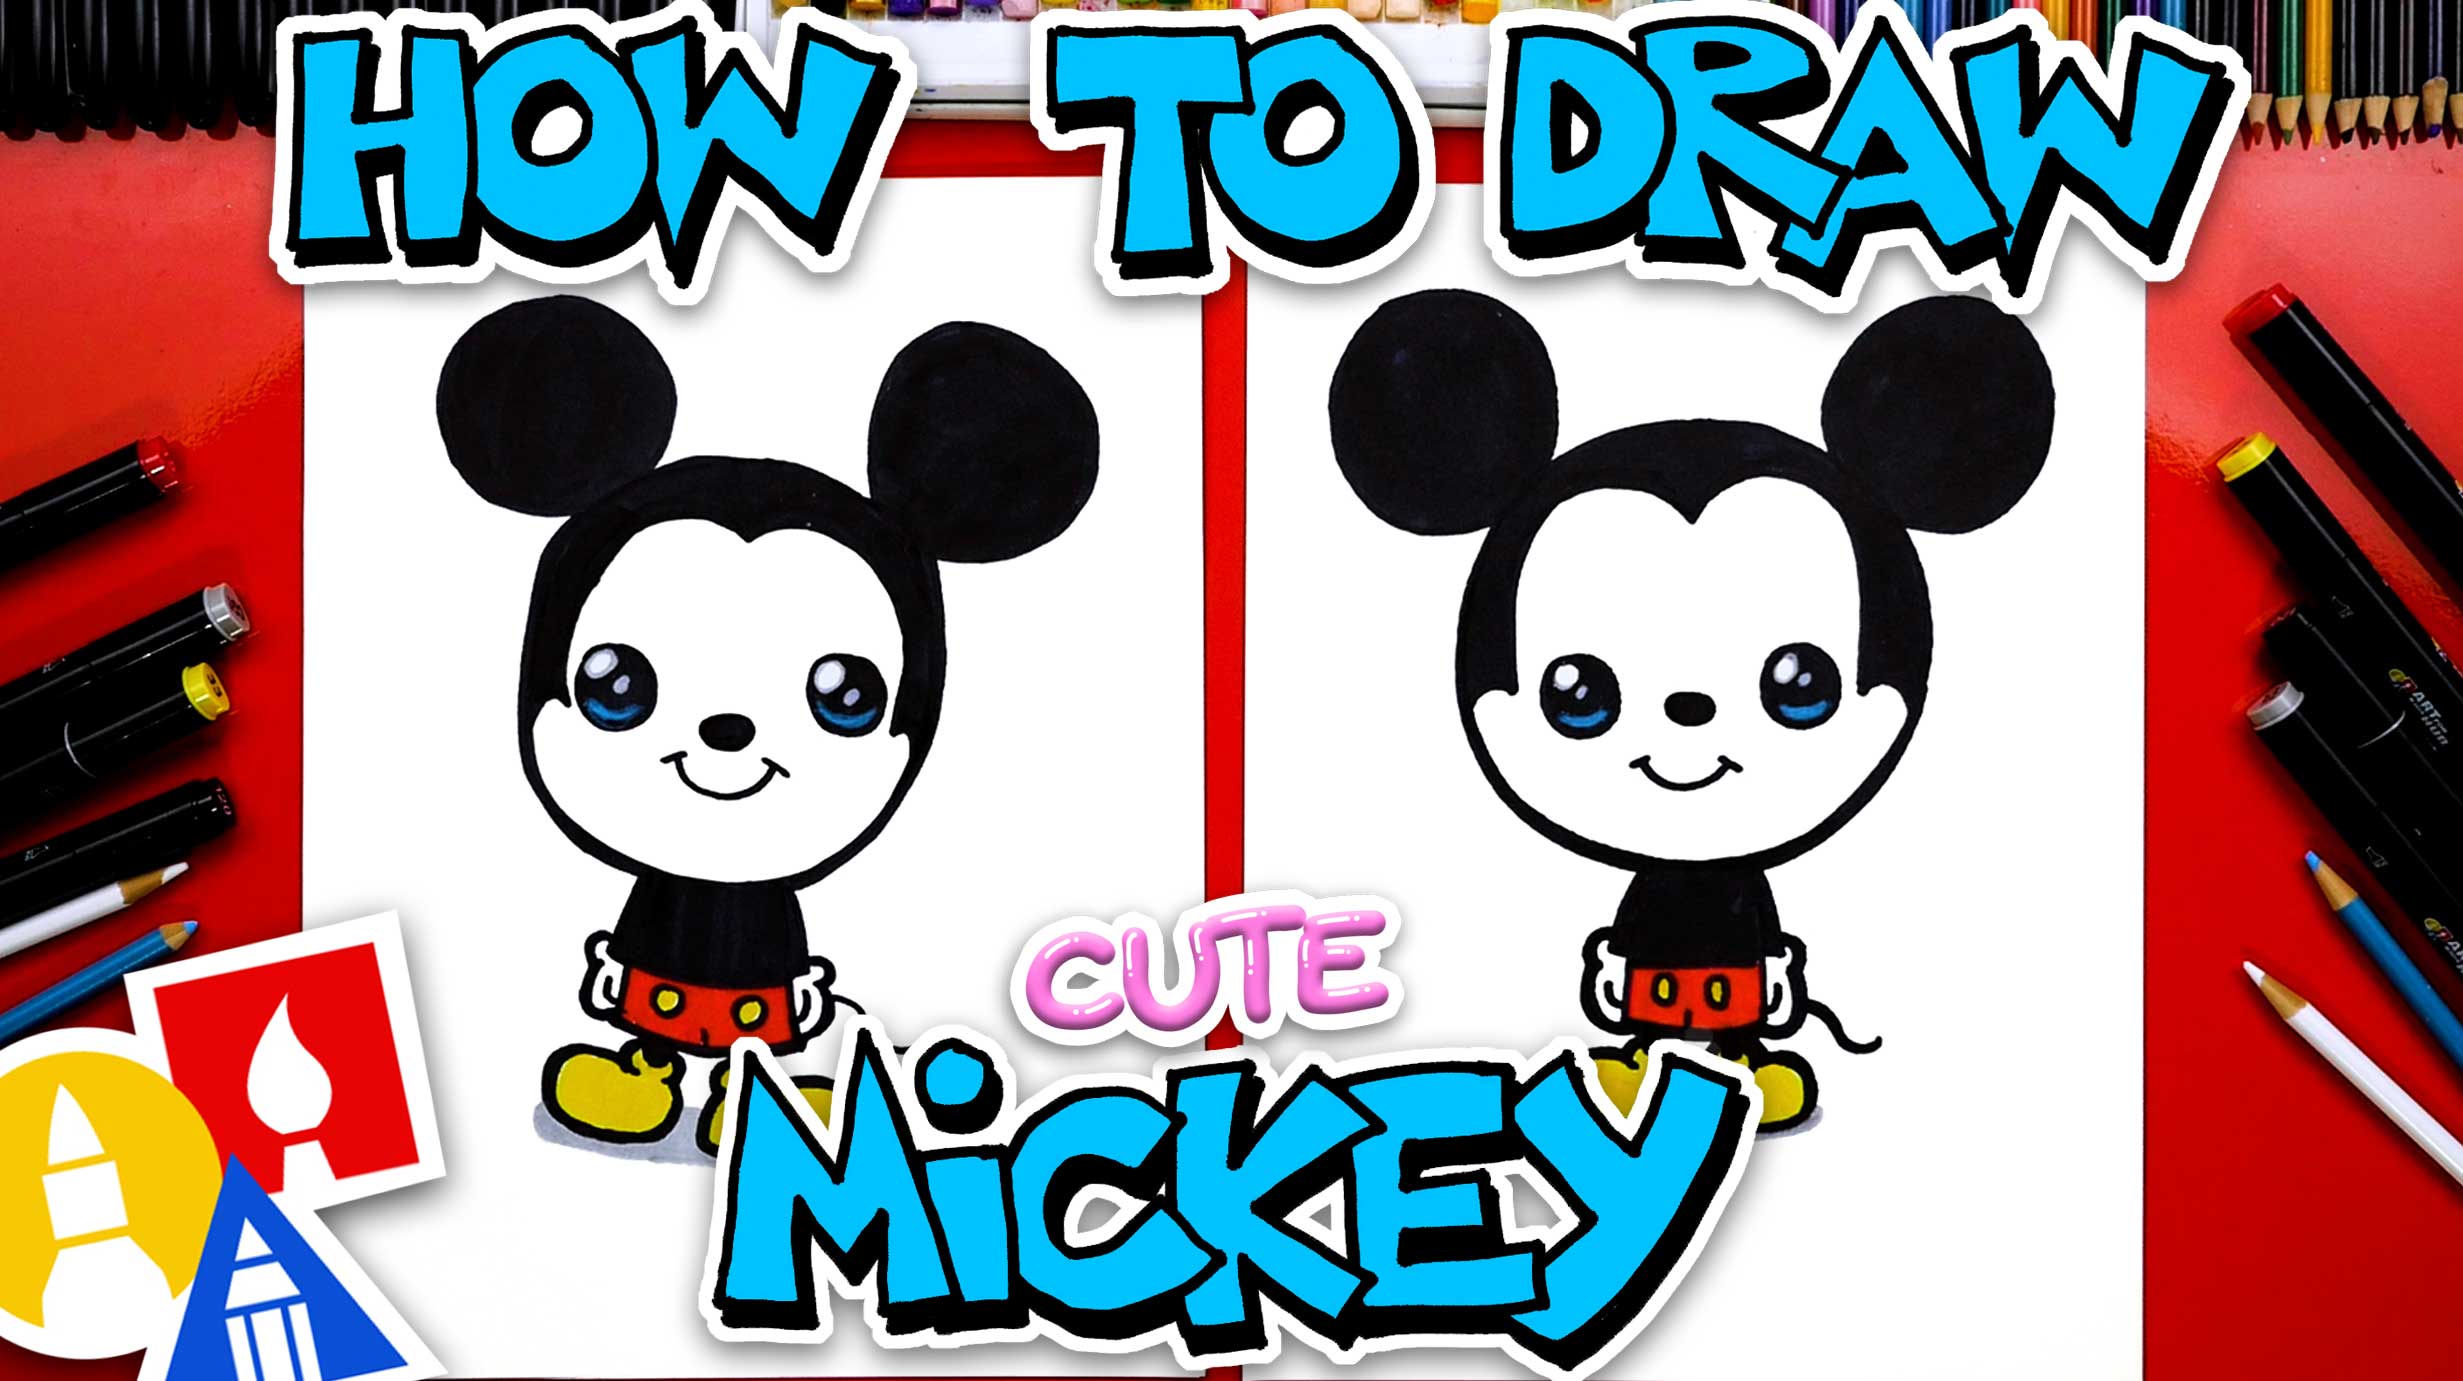 Draw walking Mickey in 18 steps - Sketchok easy drawing guides-vachngandaiphat.com.vn